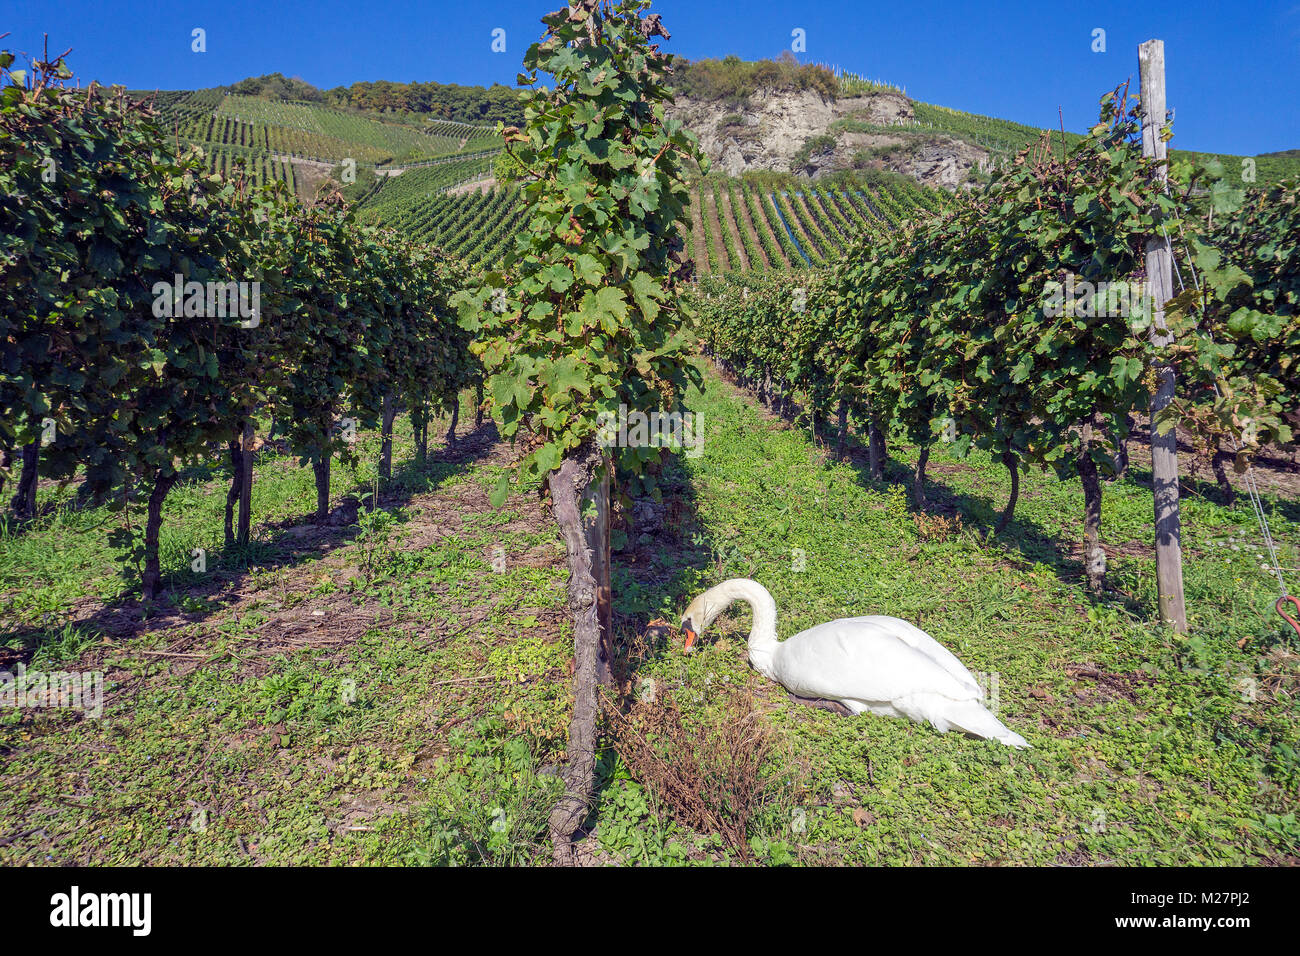 A swan (Cygnus olor) feeds on grapes at vine stocks, autun scenery at wine village Piesport, Moselle river, Rhineland-Palatinate, Germany, Europe Stock Photo